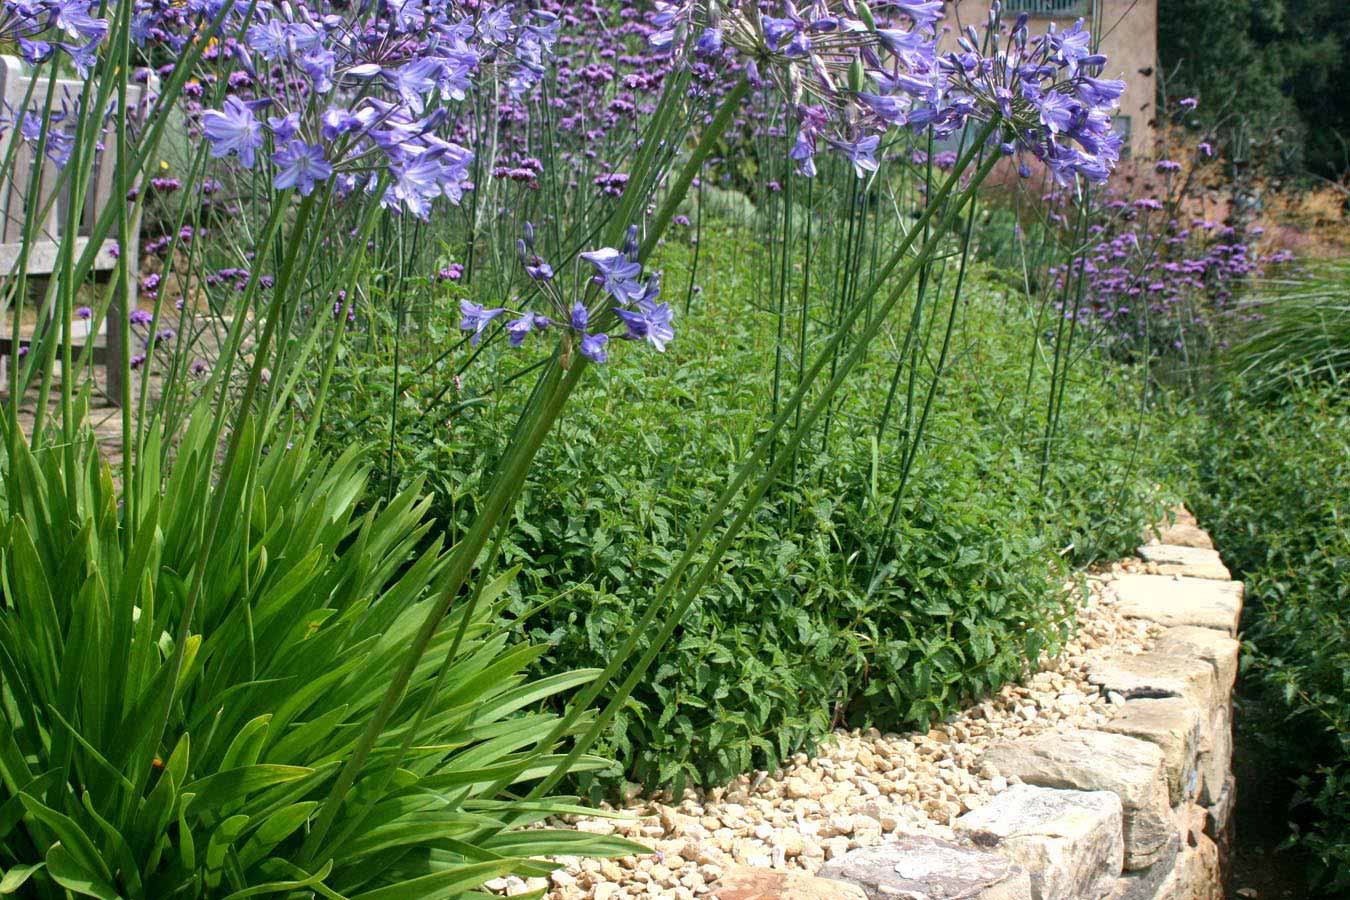 Detail of agapanthus flowers in a natural stone wall. Rae Wilkinson Garden and Landscape Design Surrey, Sussex, Hampshire, London, South-East England